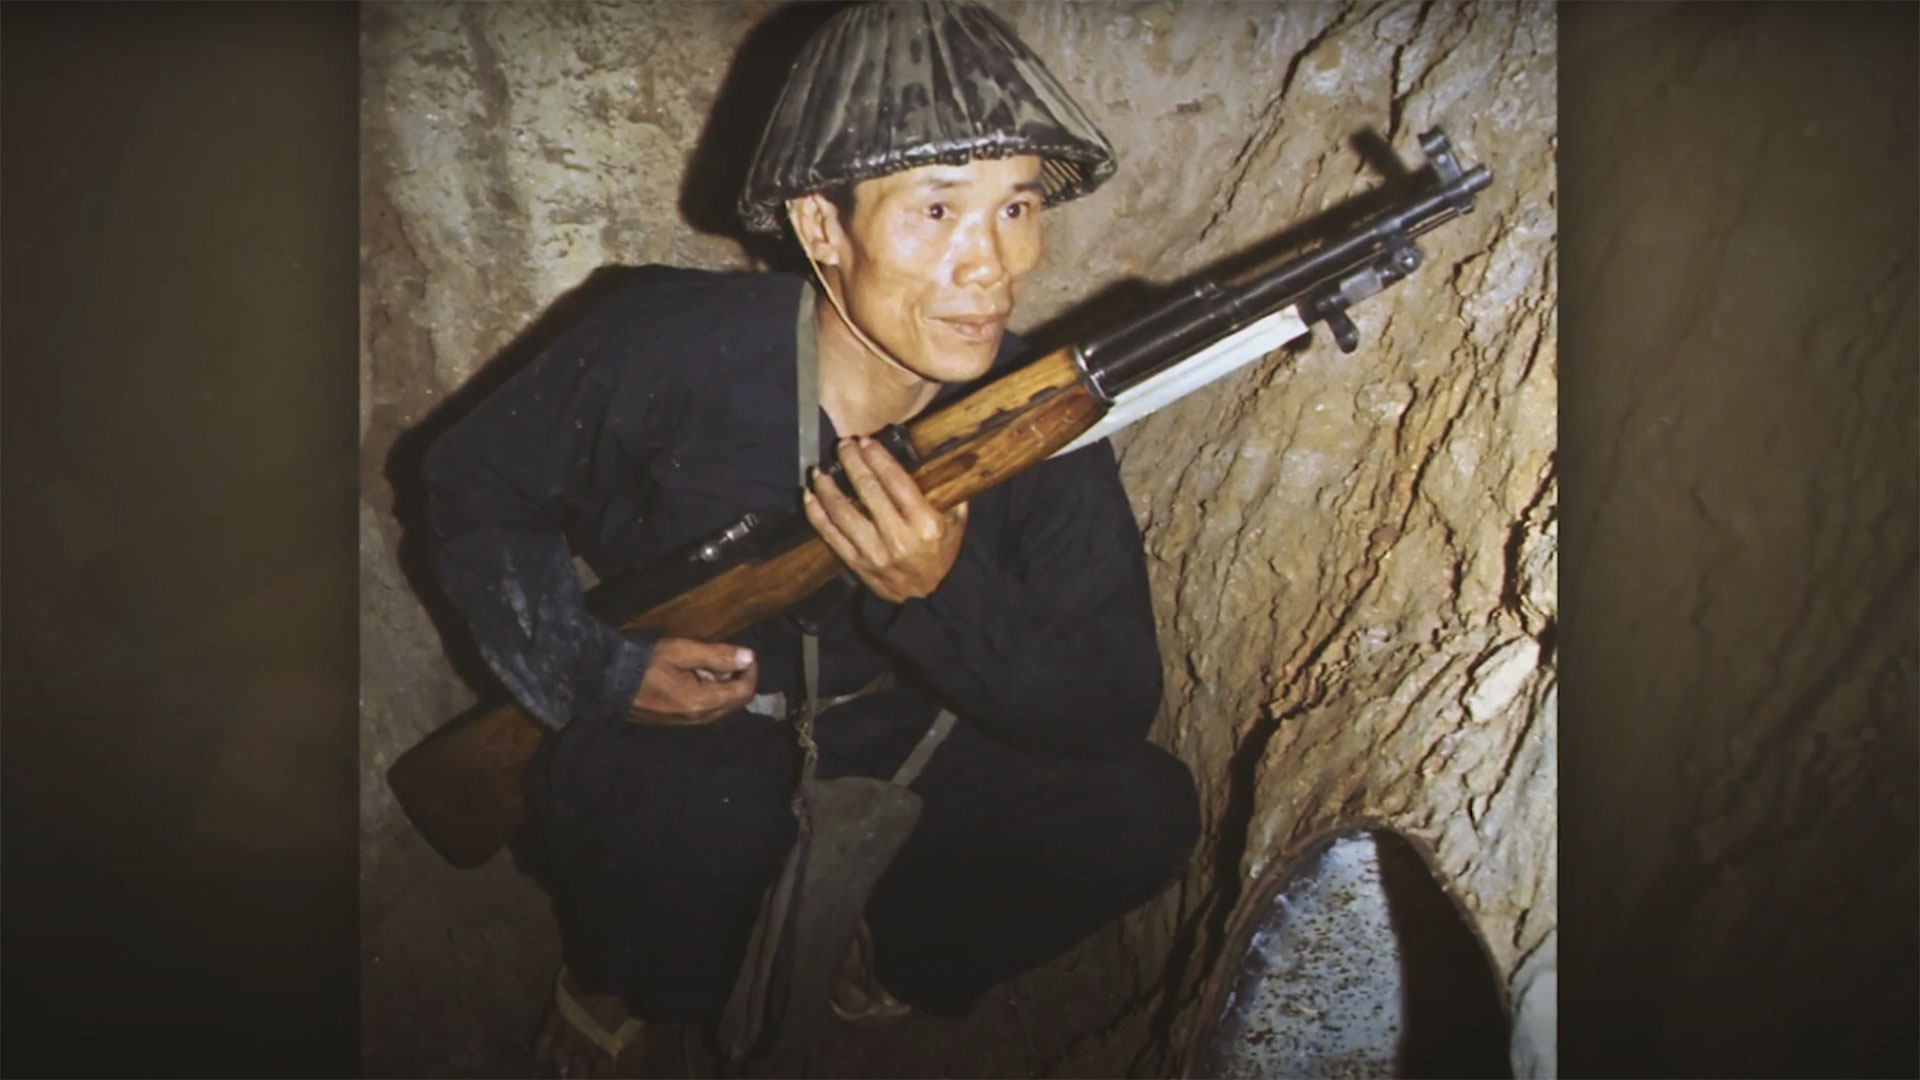 A Veit-Cong solider armed with a SKS carbine during the Vietnam War.